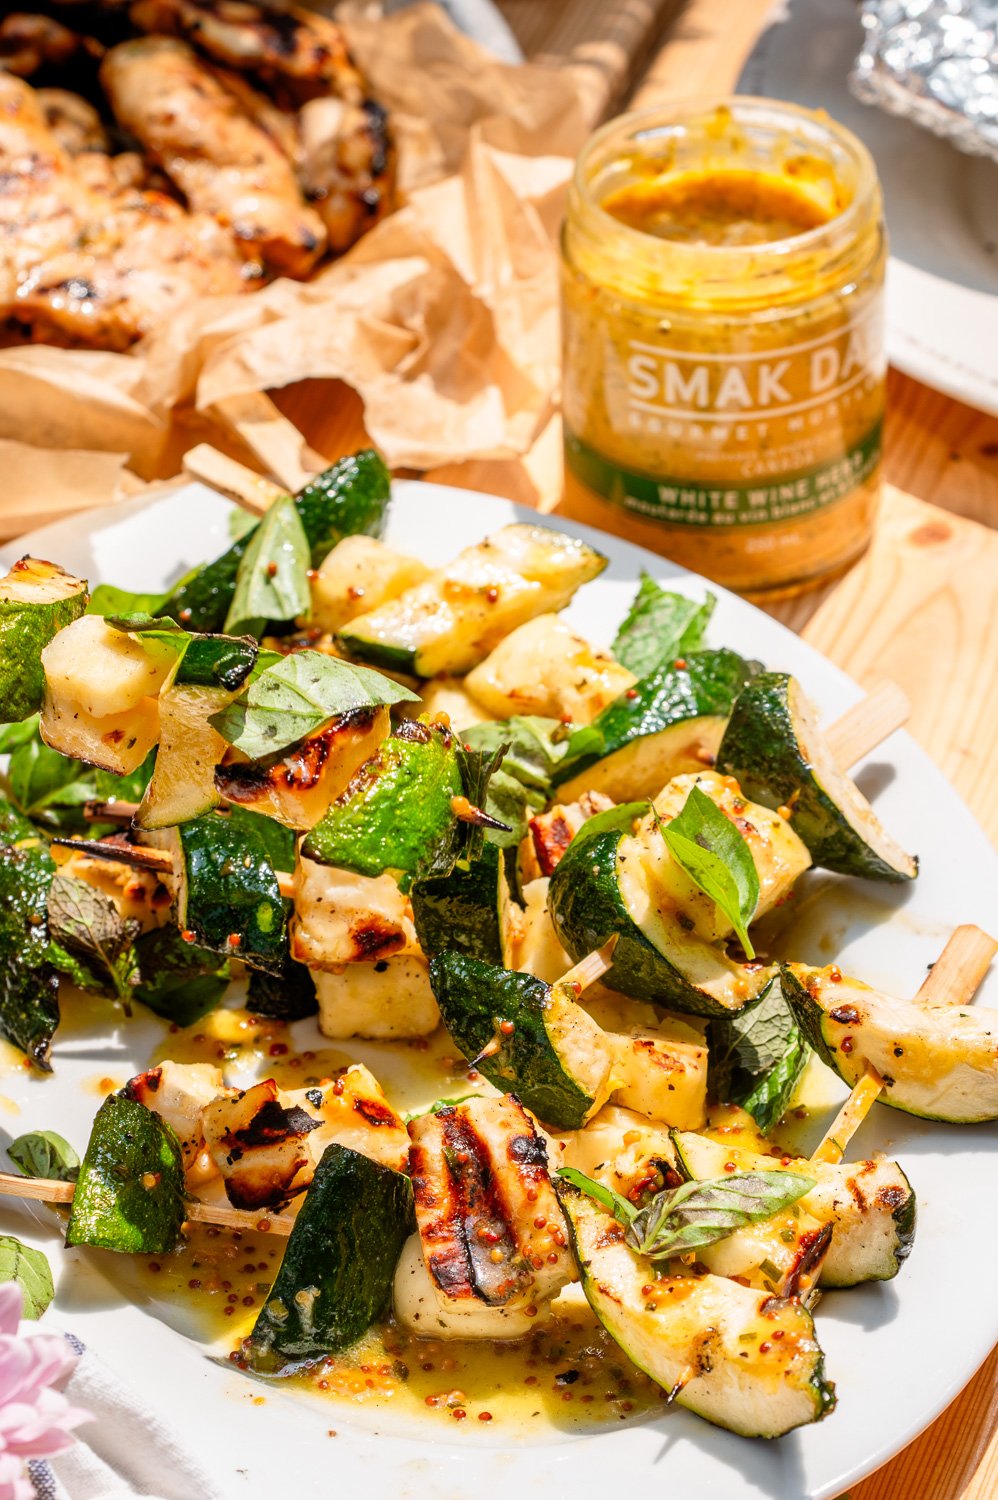 Grilled Zucchini & Halloumi Skewers with Lemon Herb Vinaigrette